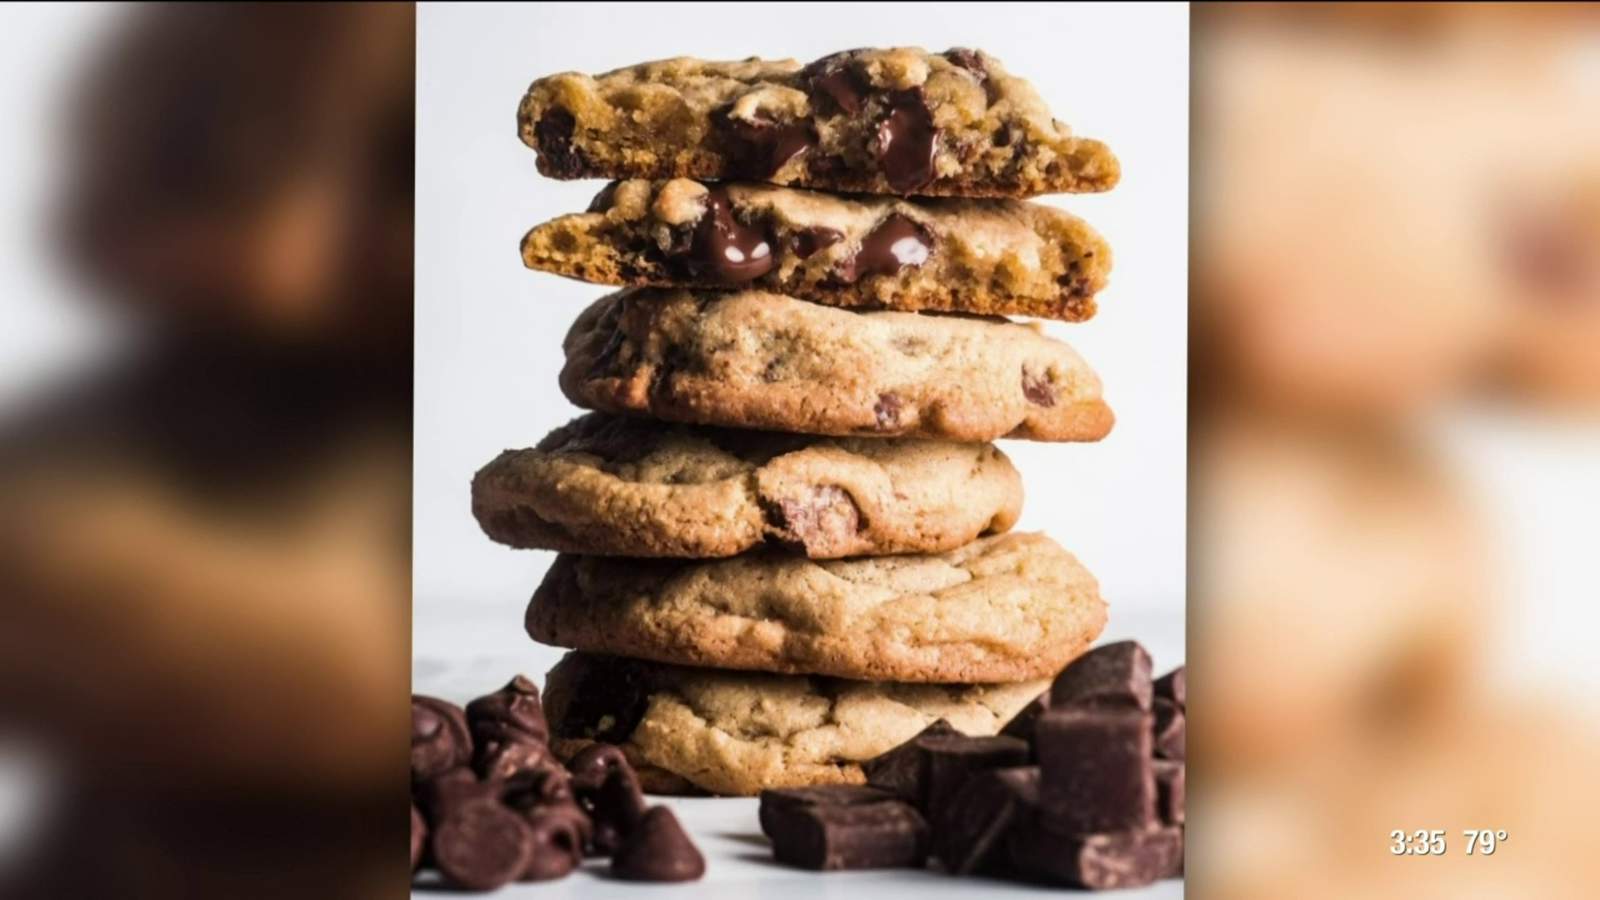 Houston’s Stacked Cookies has a sweet startup story and fifty flavors to satisfy your cravings | HOUSTON LIFE | KPRC 2